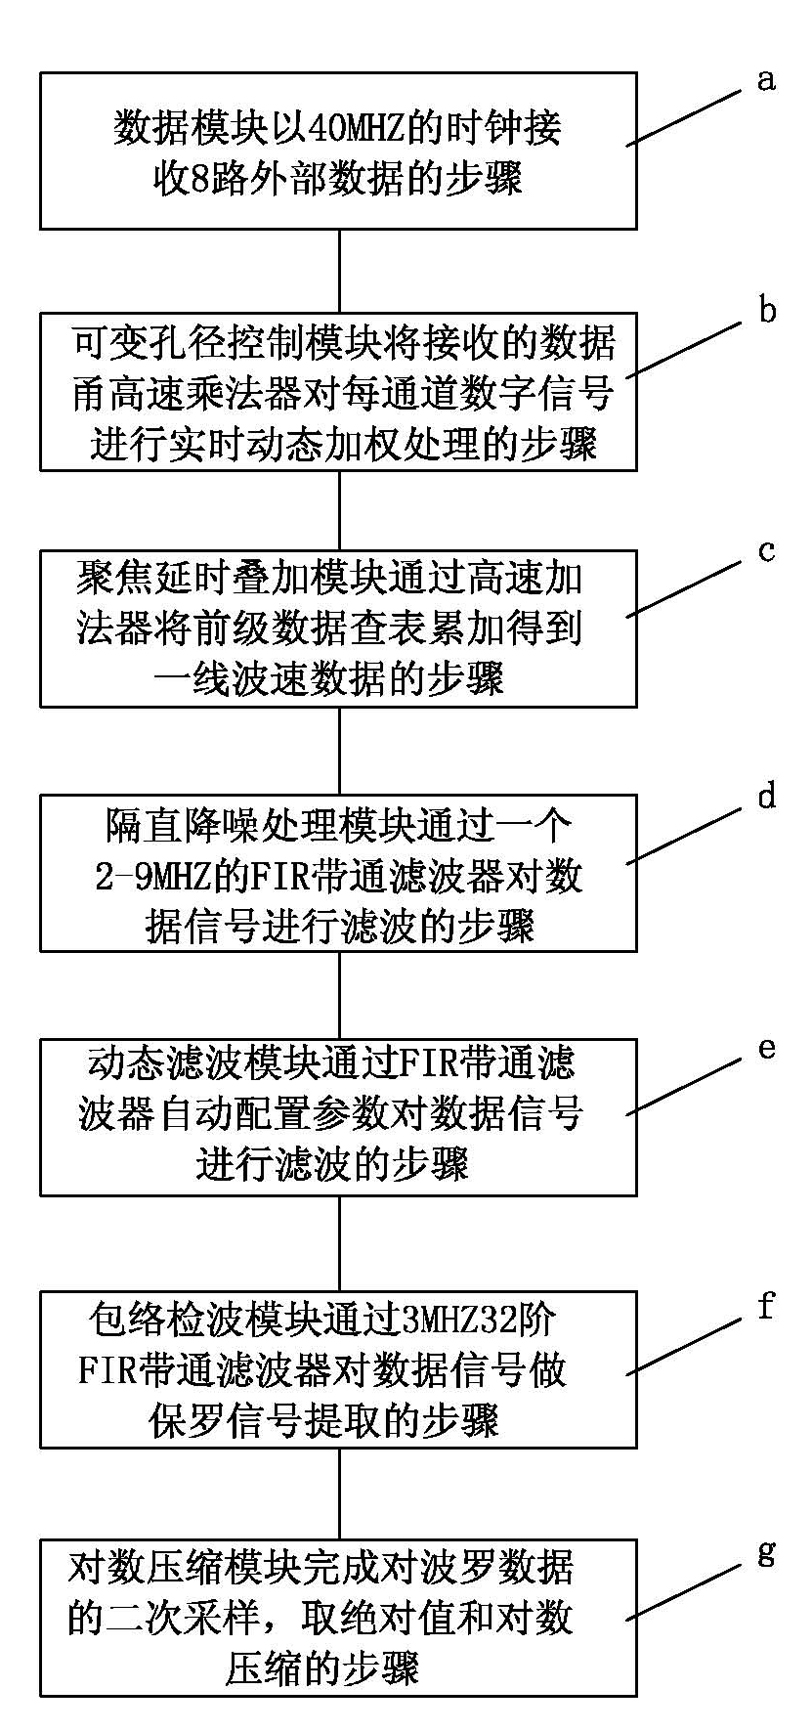 Embedded B-mode ultrasonic diagnostic device and signal processing method thereof